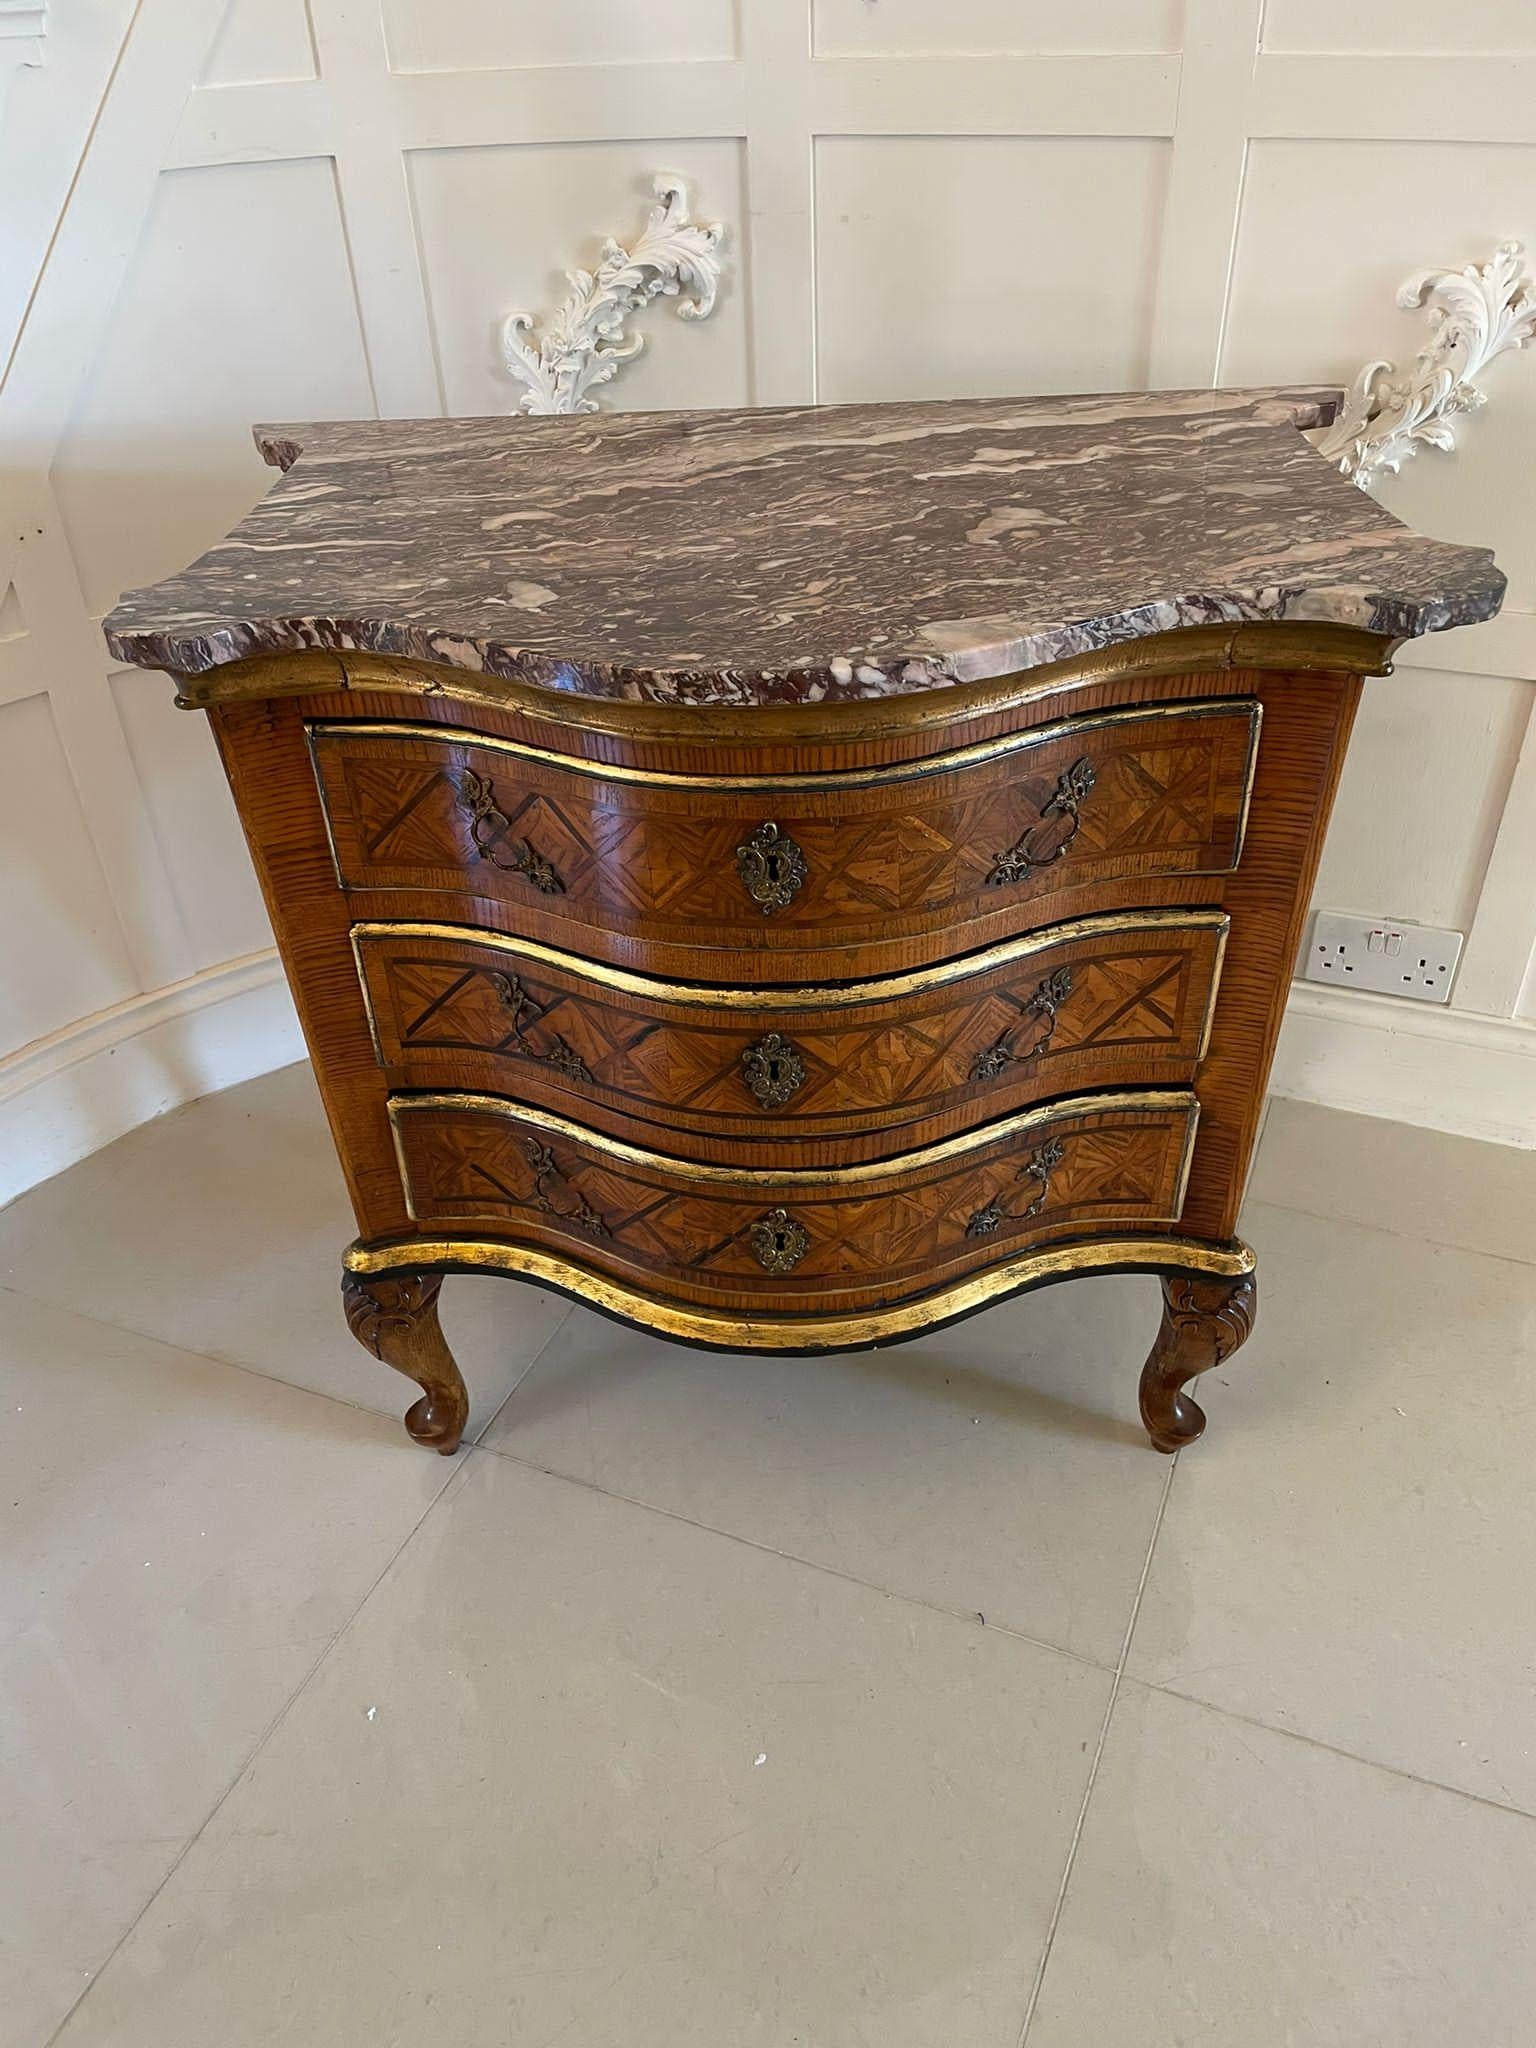 Antique Quality Parquetry Inlaid Serpentine Shaped Marble Top Commode Chest For Sale 5